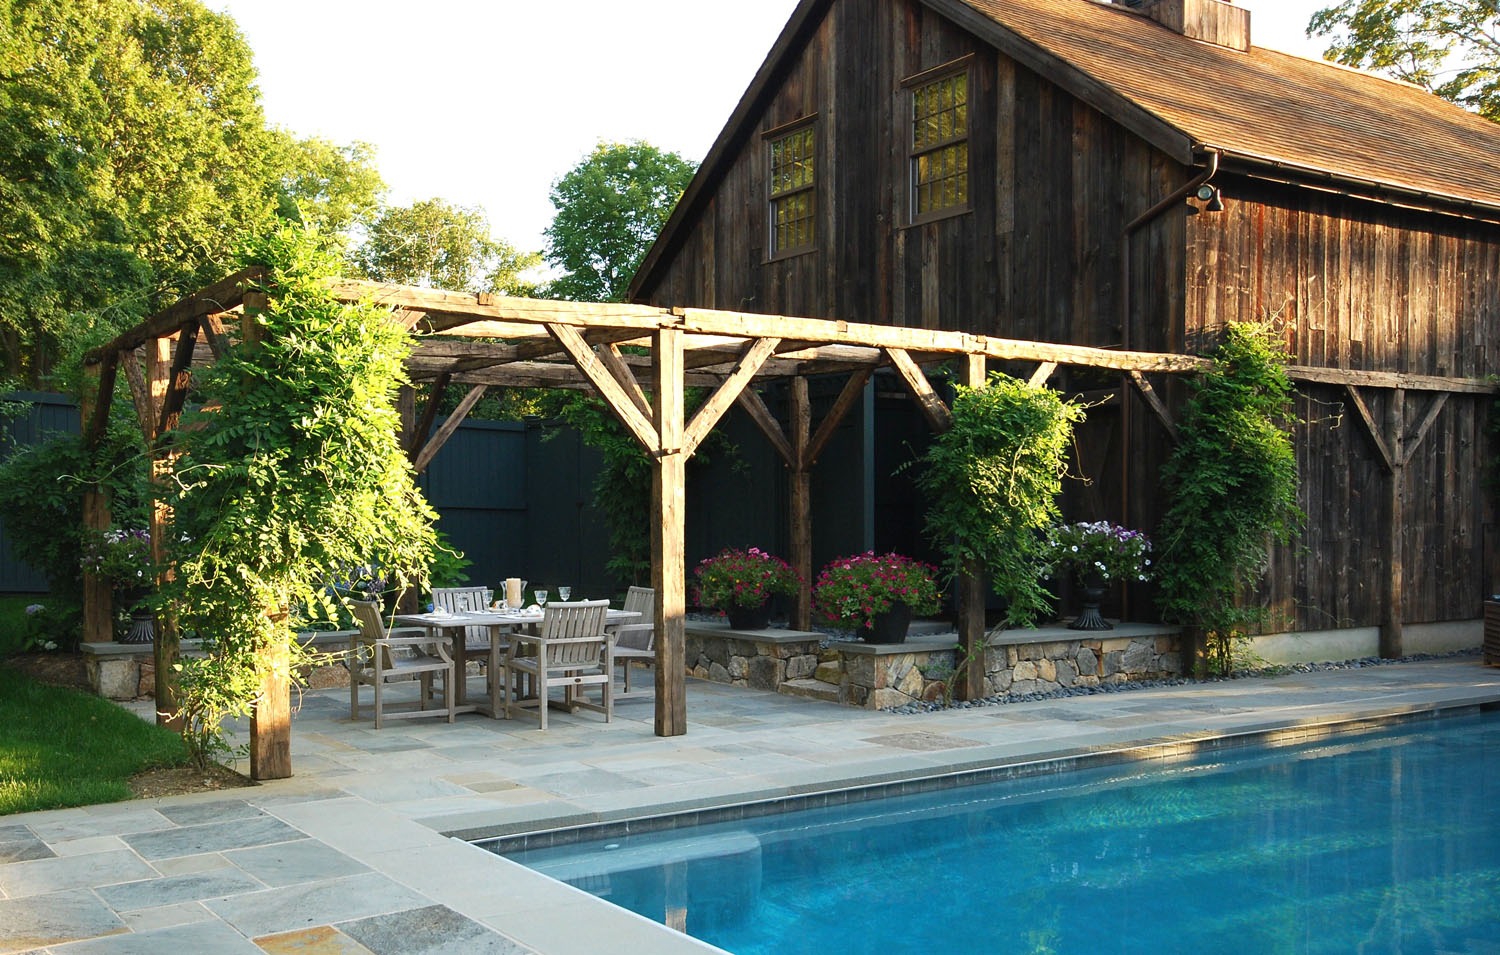 A rustic wooden barn with a pergola, creeper plants, an outdoor dining set, and a swimming pool in a lush garden setting at dusk.